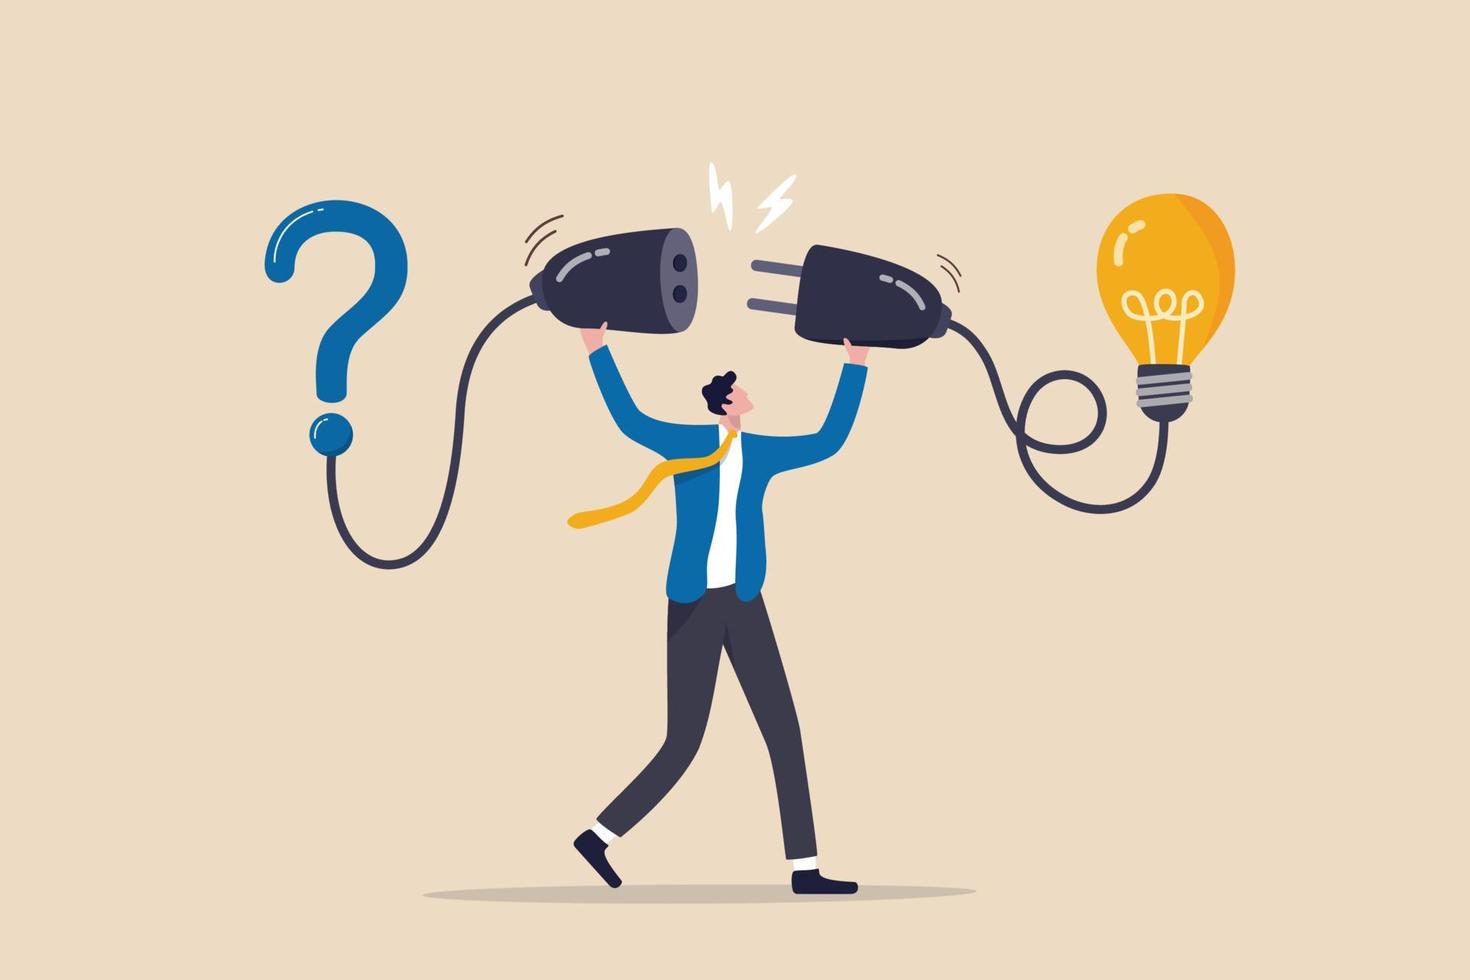 Solution solving problem, answer to hard question or creativity idea and innovation help business success, leadership to overcome difficulty, businessman connect question mark with lightbulb solution. vector